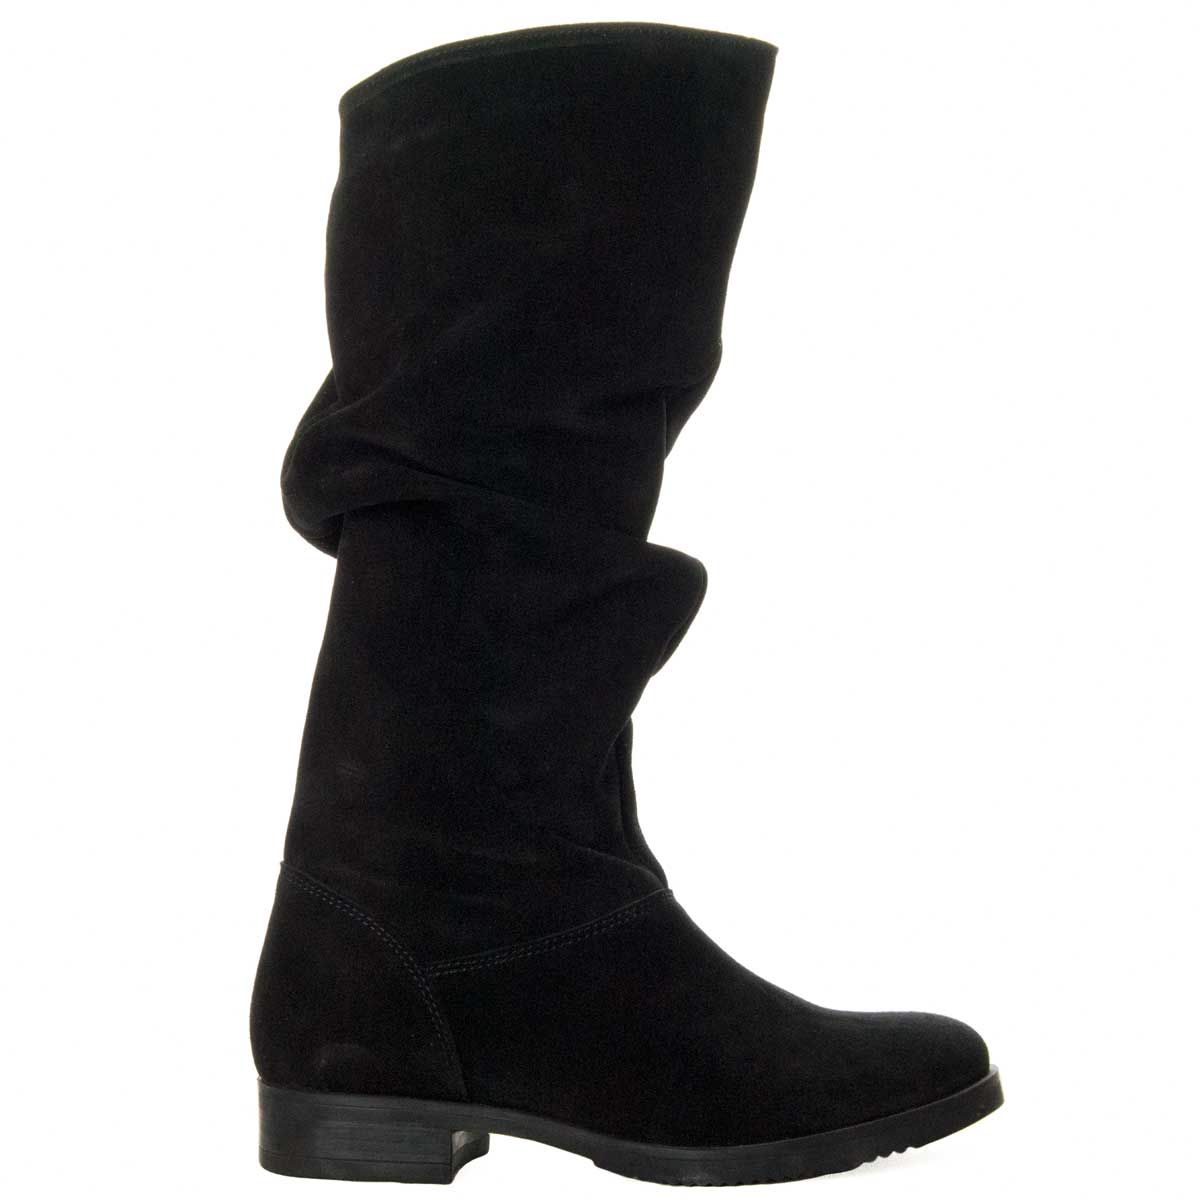 Boot 100% skin. Fine hair lined interior, and non-slip sole. Very comfortable, and very current boot, ideal for an urban daily style. Boots made by hand in high quality leather and round toe. Built with a very durable rubber sole. Made in Spain.